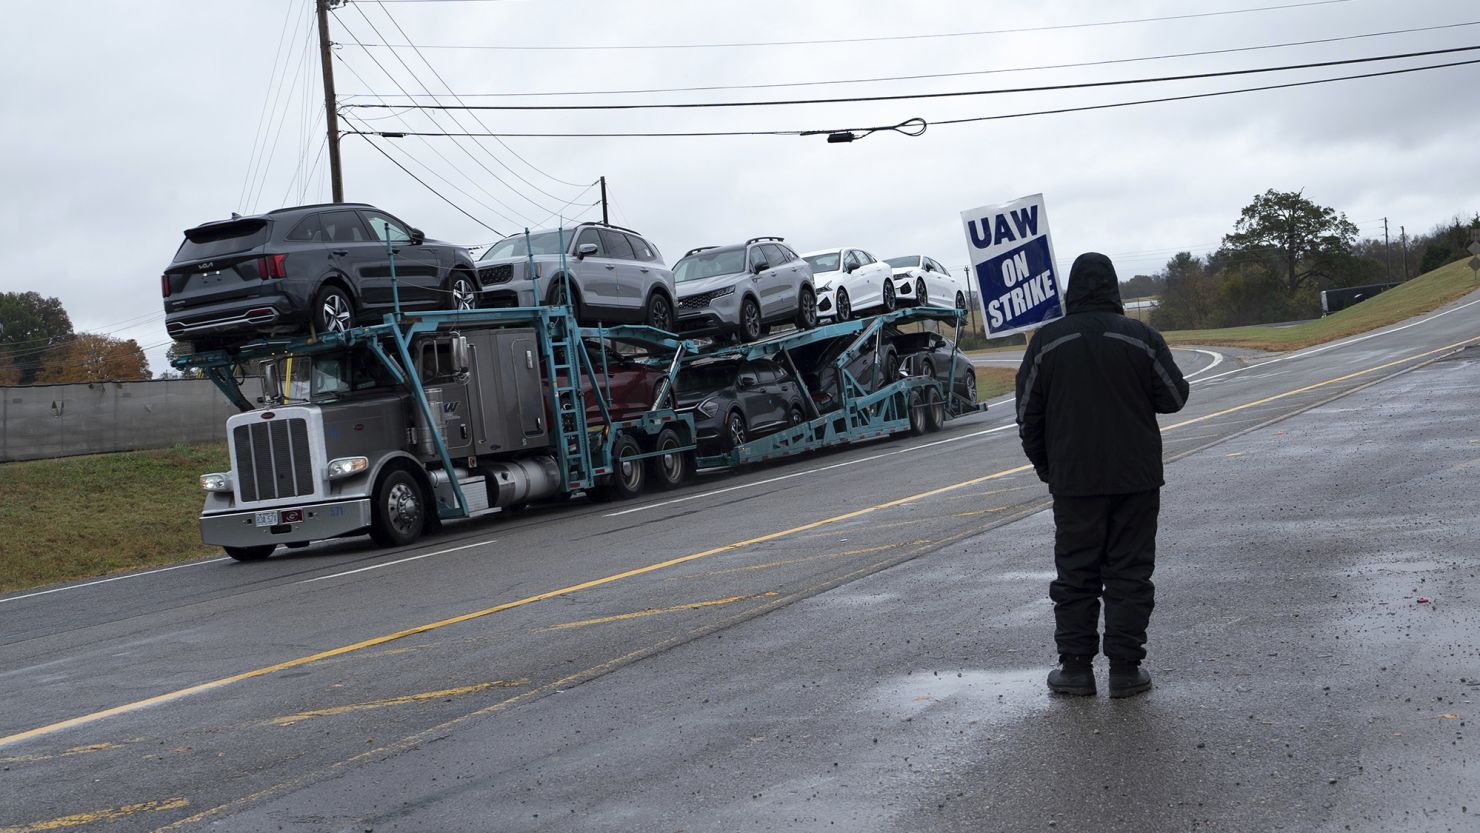 General Motors' share price fell 19% over the six weeks of the UAW strike, and remain down 6% for the year as of Wednesday.